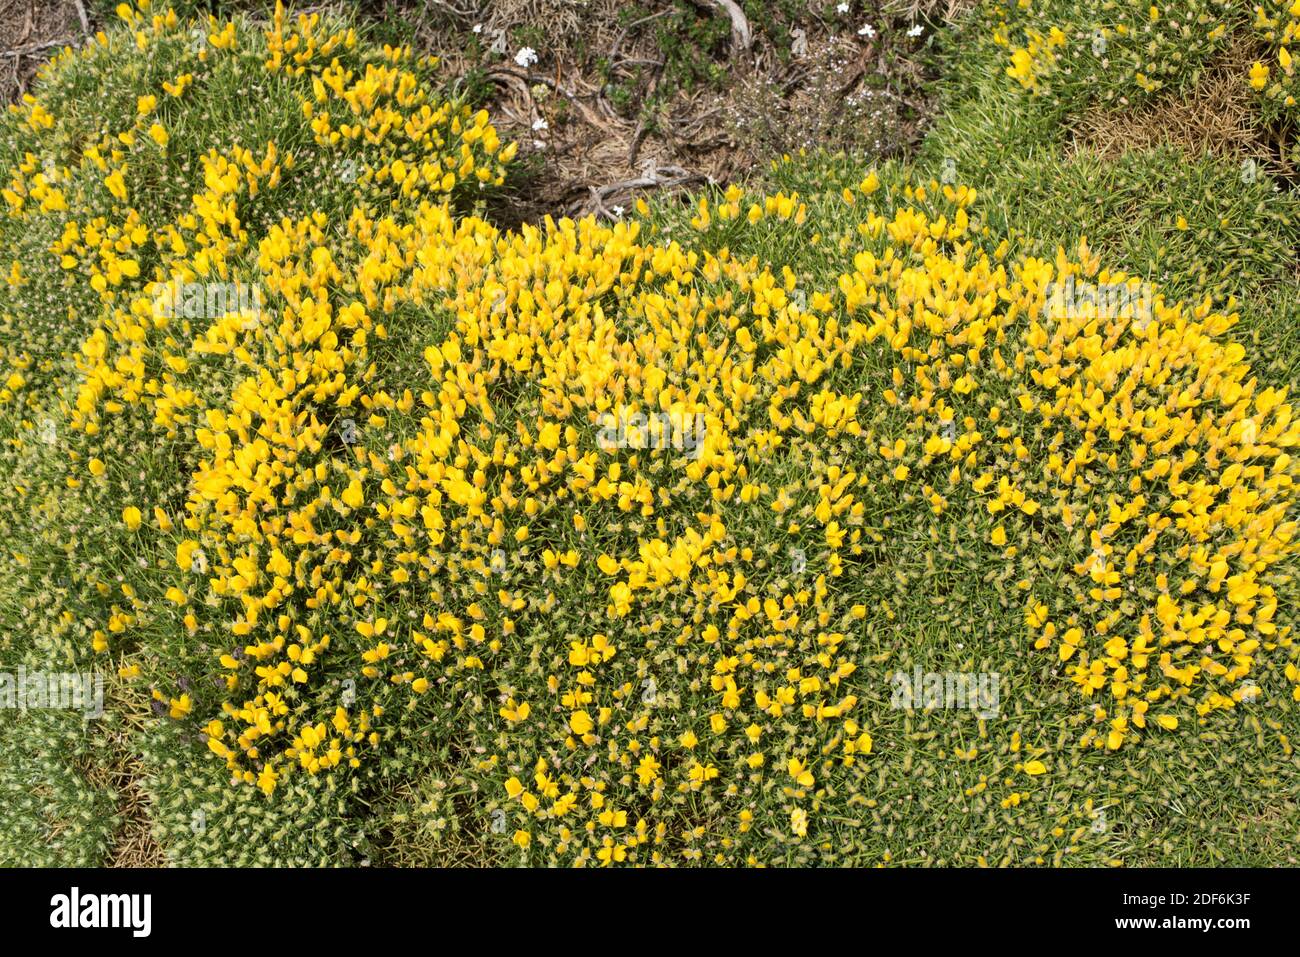 Horrible broom (Echinospartum horridum or Genista horrida) is a cushion-like thorny shrub endemic to Central Pyrenees and French Central Massif. This Stock Photo